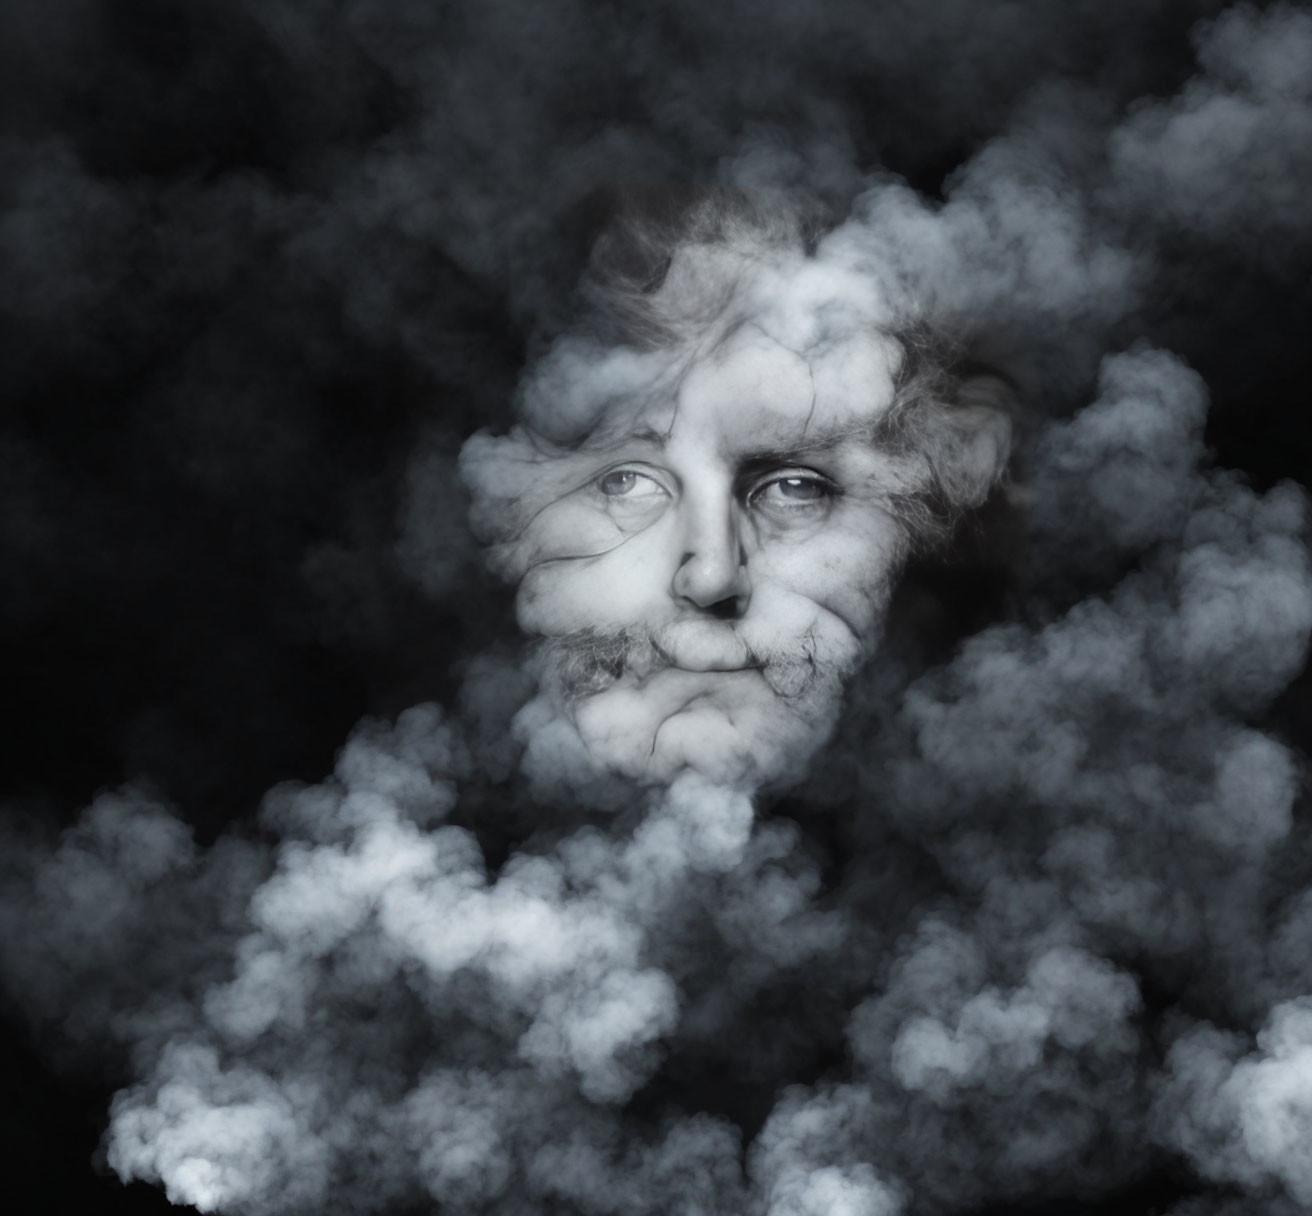 Monochrome image of face obscured by swirling smoke